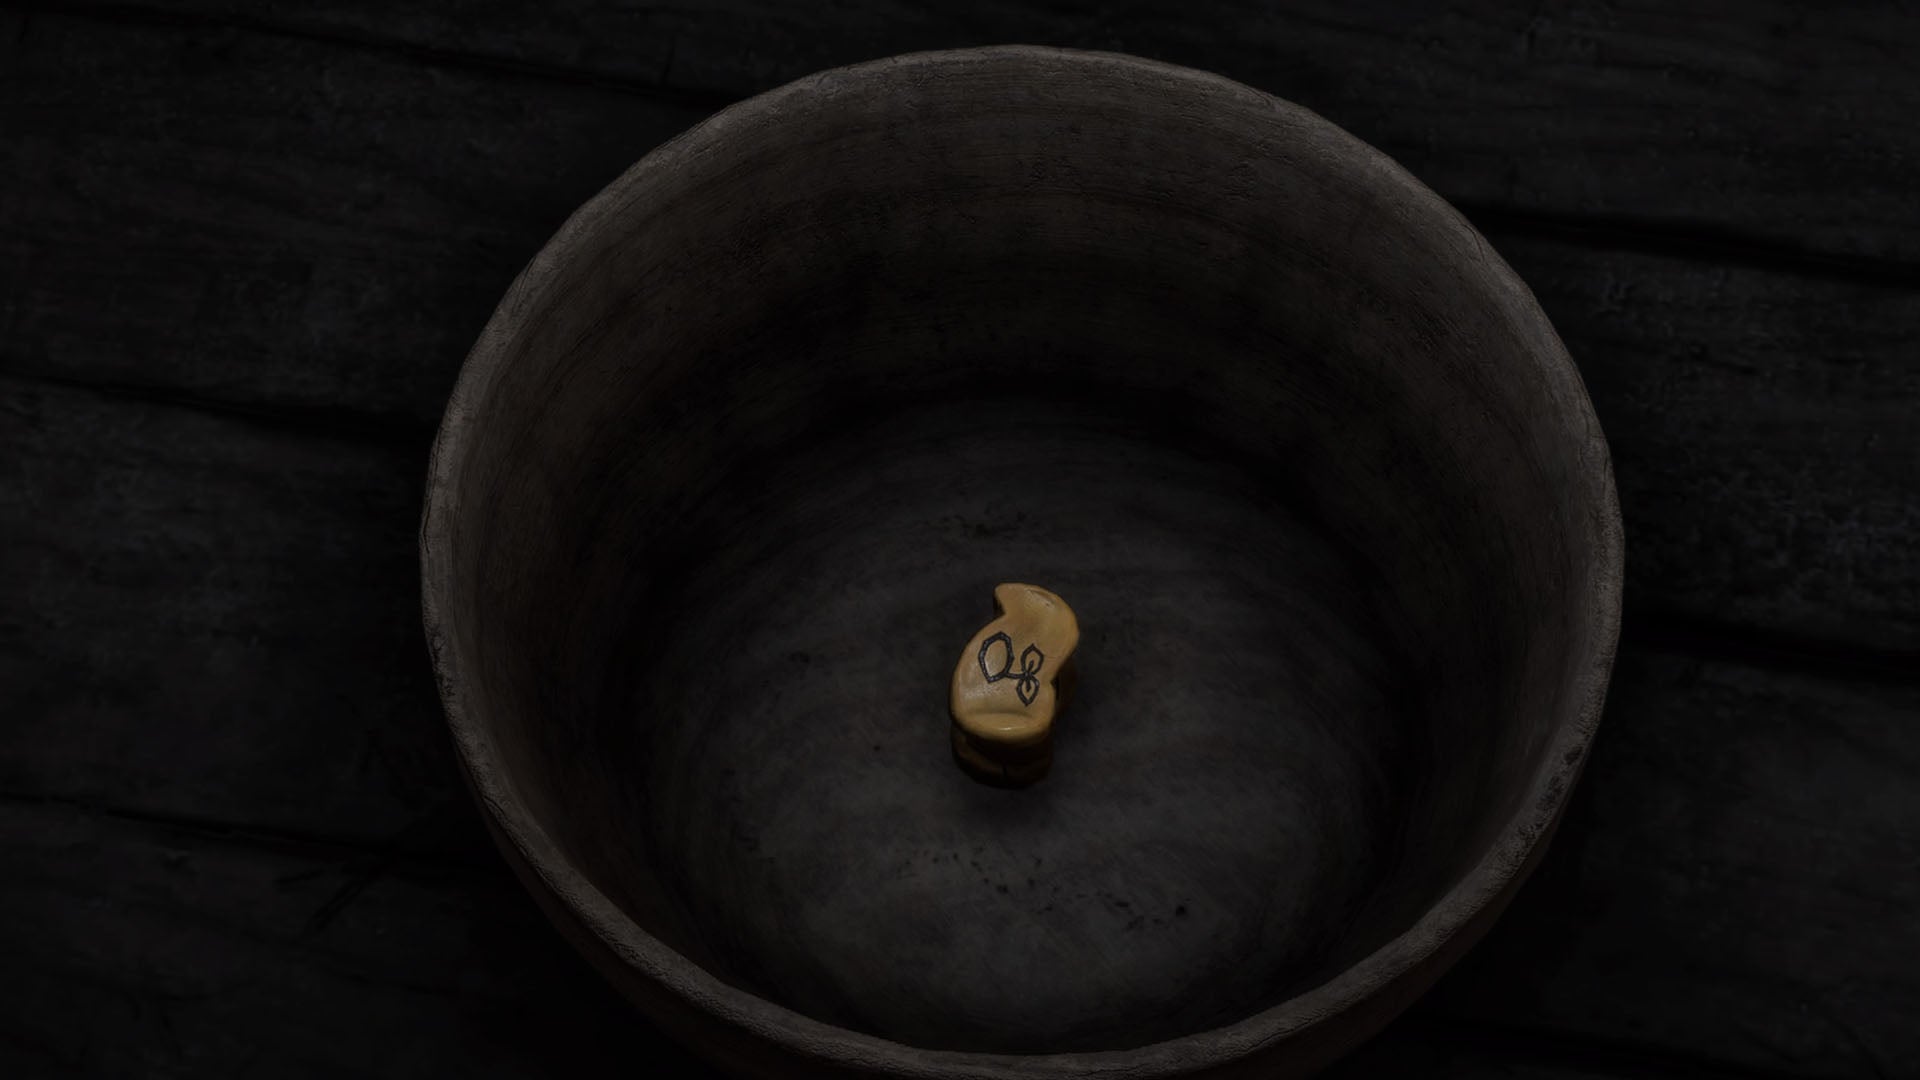 Forspoken, a Partha that has landed on the seed symbol is sitting in a bowl